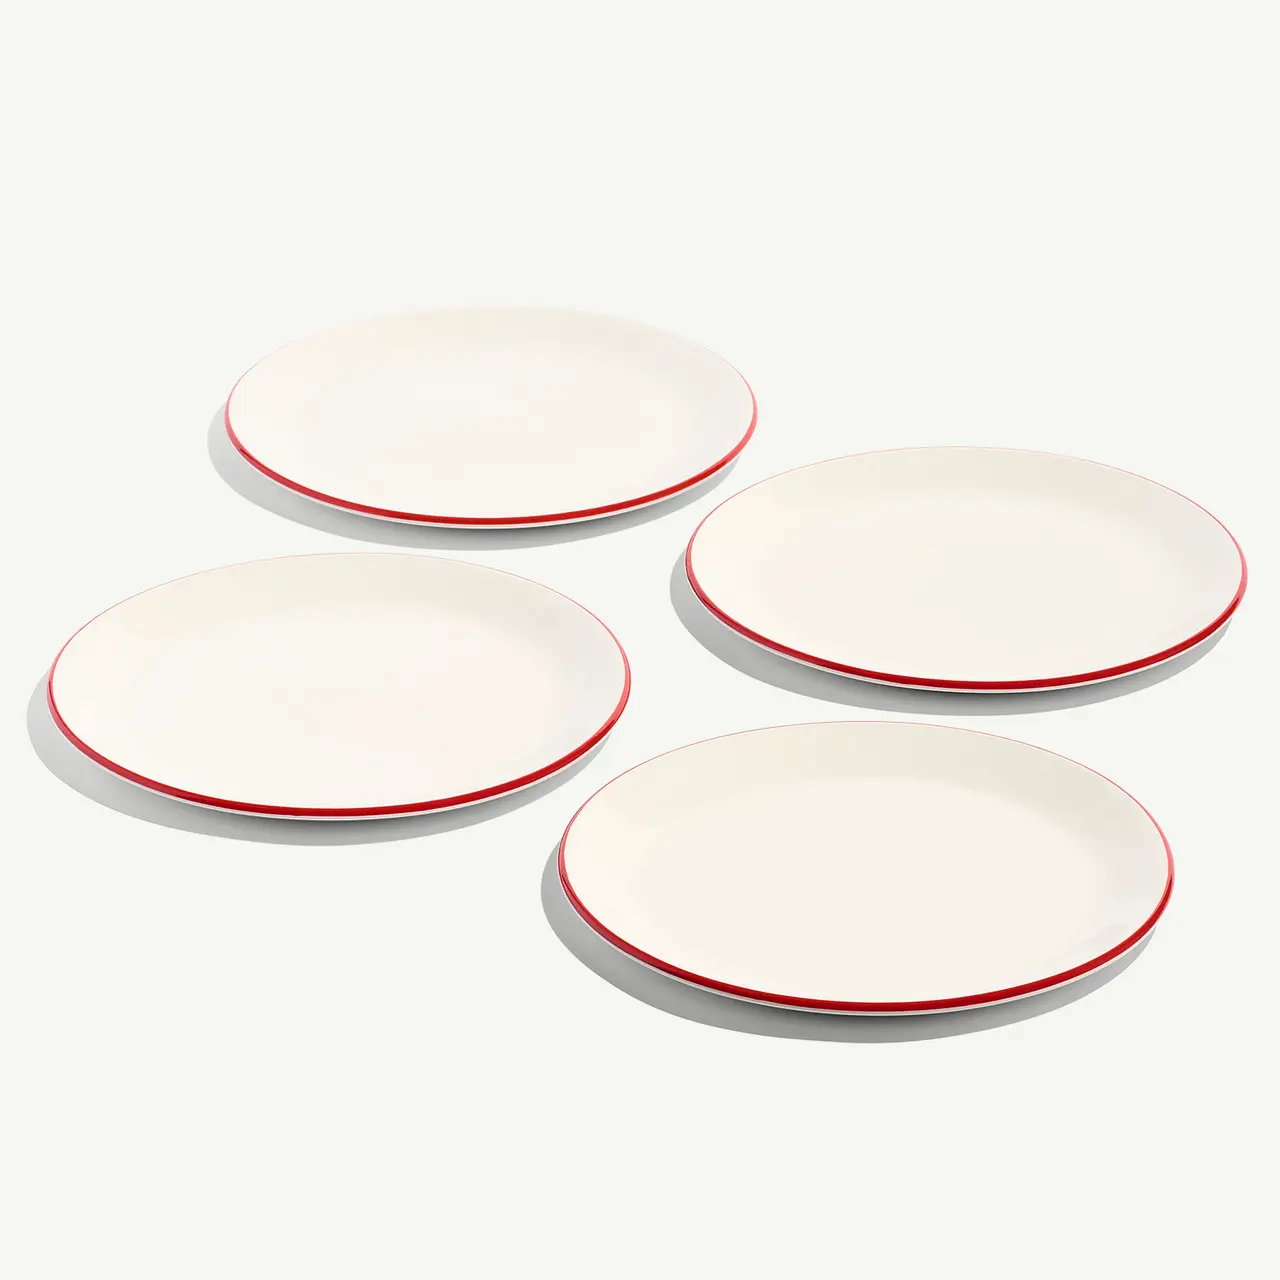 Four empty white plates with red trim are arranged on a light background.